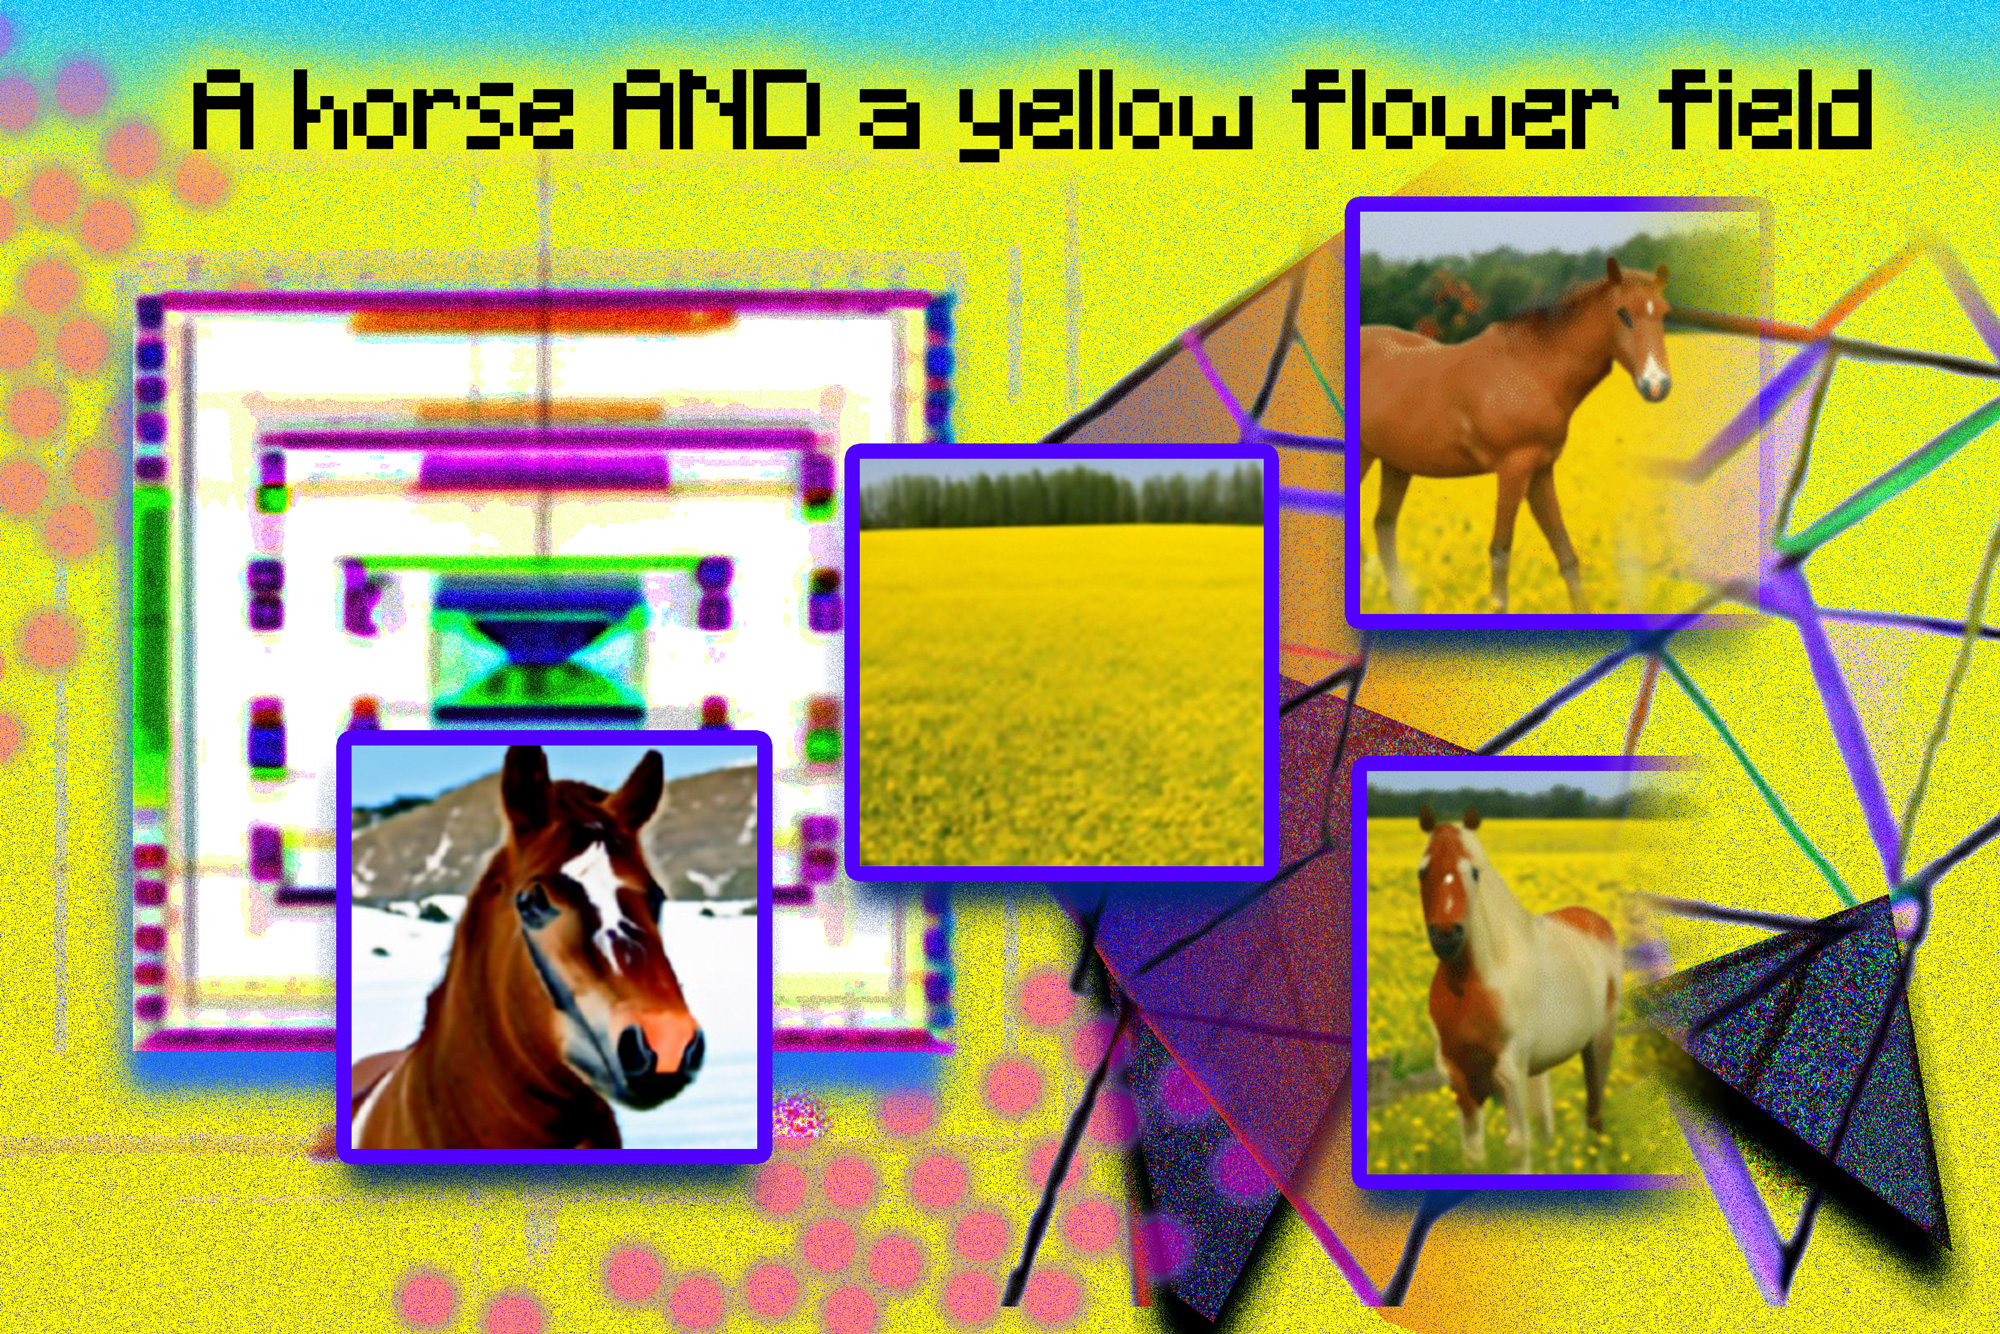 This photo illustration was created using generated images from an MIT system called Composable Diffusion, and arranged in Photoshop. Phrases like “diffusion model” and “network” were used to generate the pink dots and geometric, angular images. The phrase “a horse AND a yellow flower field” is included at the top of the image. Generated images of a horse and yellow field appear on the left, and the combined imagery of a horse in a yellow flower field appear on the right.